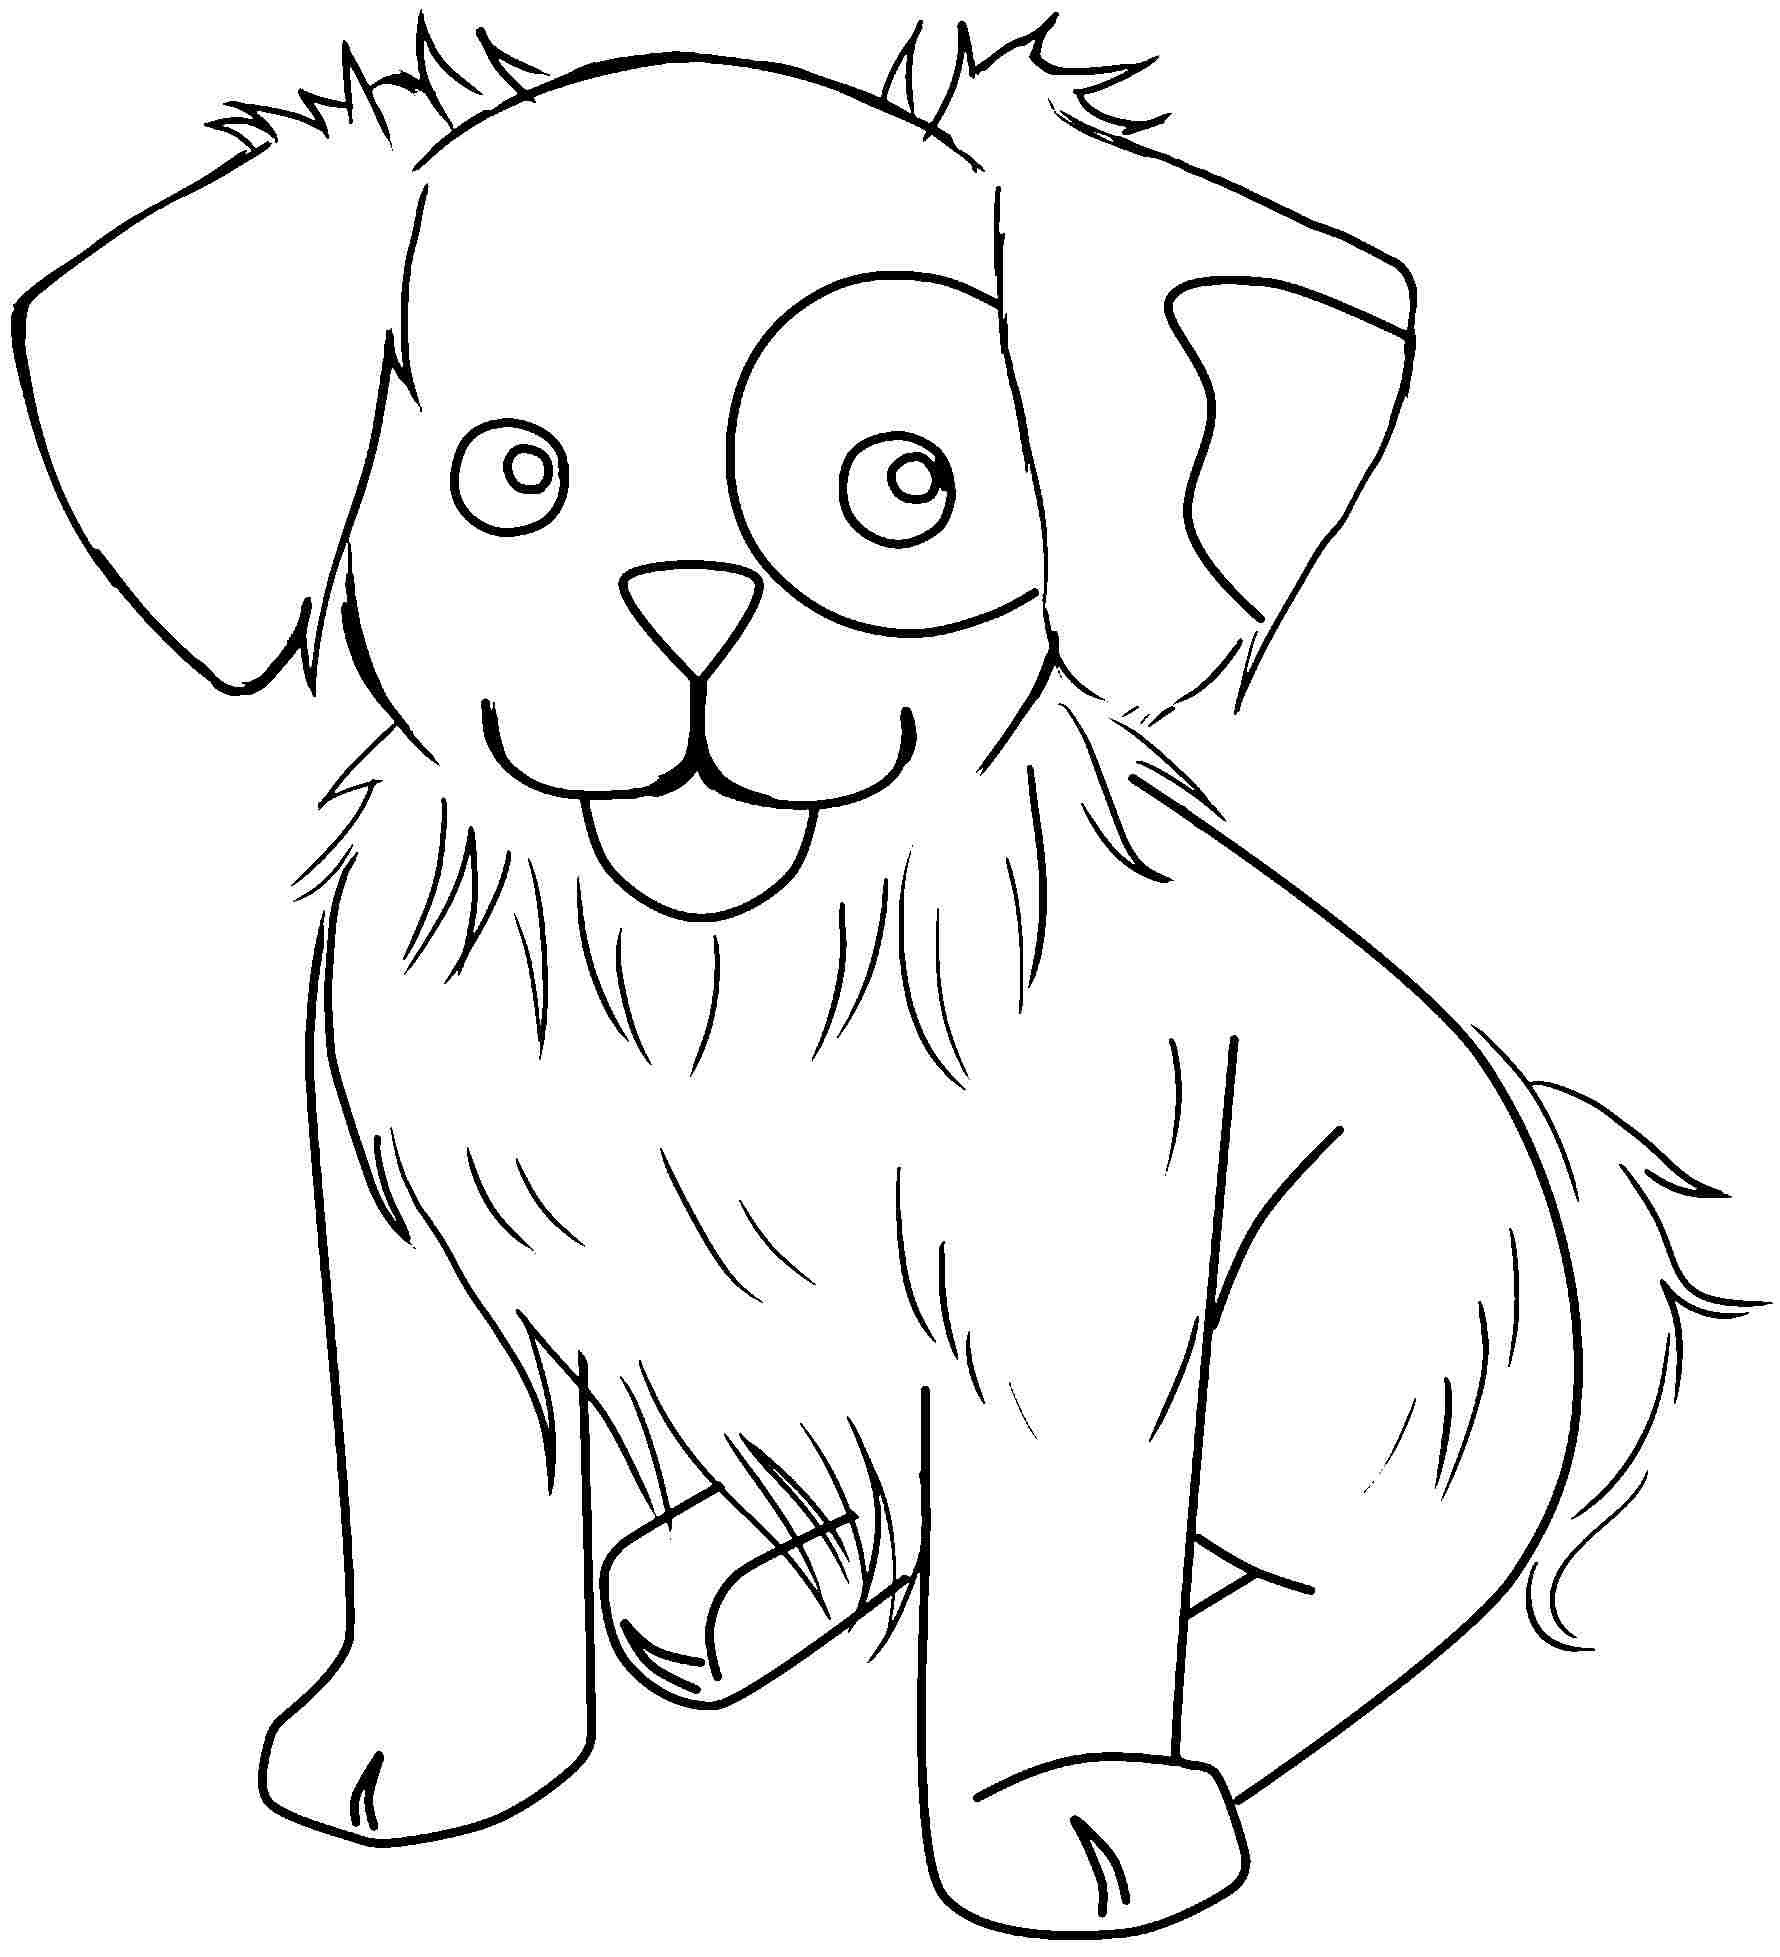 Free Coloring Pages Animals | Topsailmultimedia - Free Coloring Pages Animals Printable